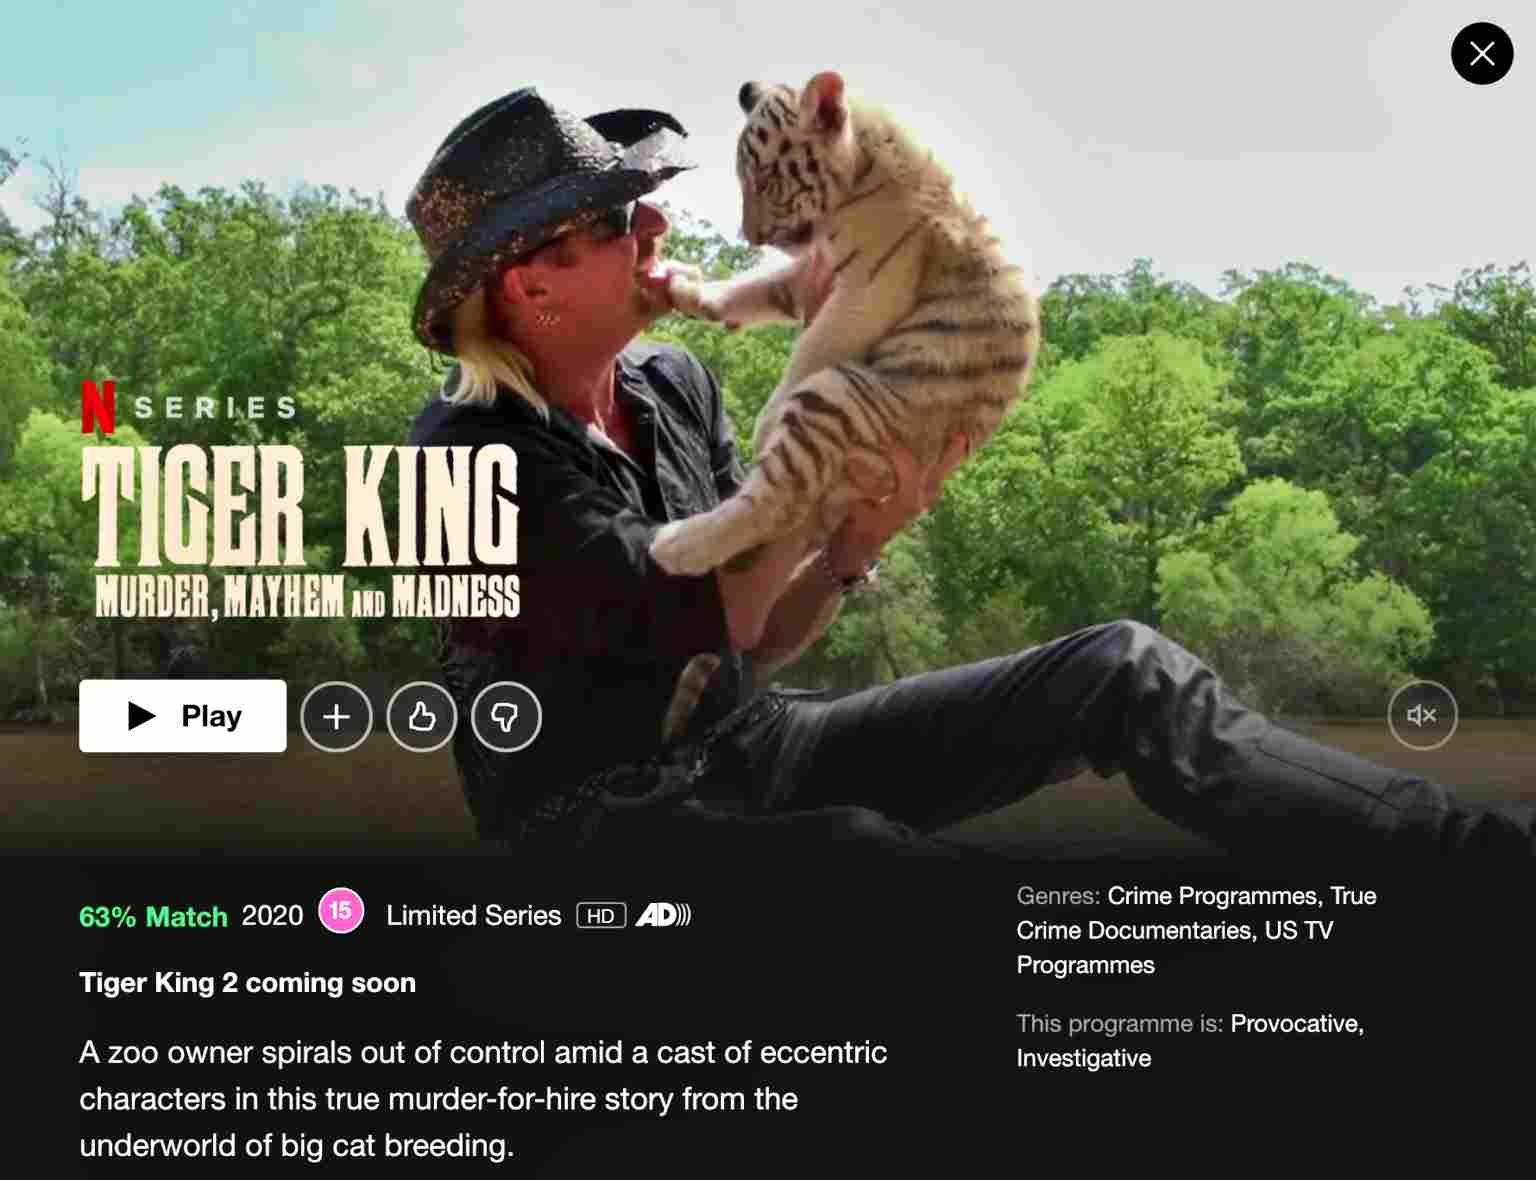 What is happening with Season 2 of Tiger King on Netflix?